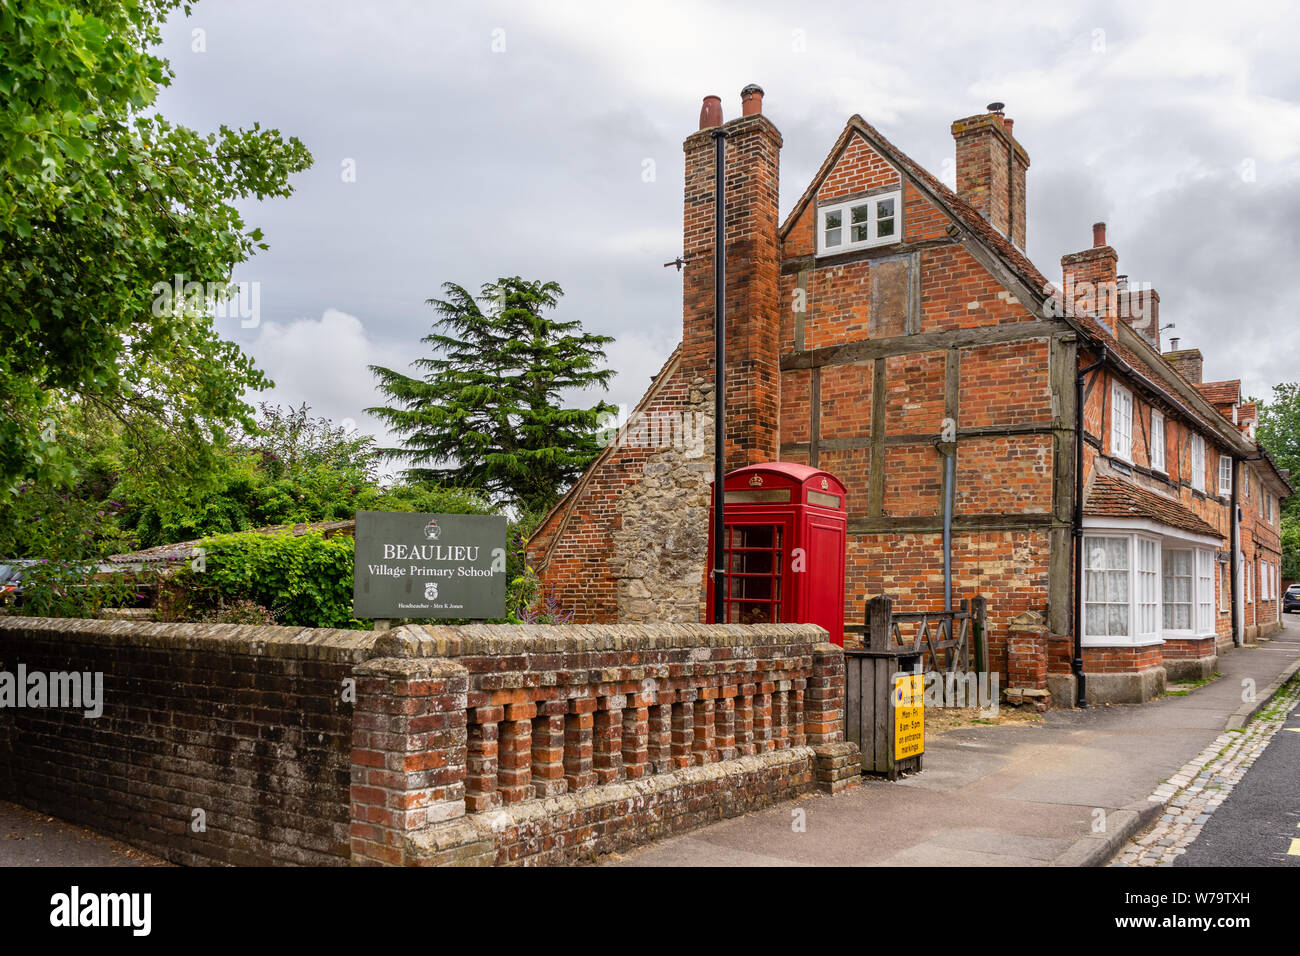 Entrance to the Beaulieu Village Primary School along the High Street in Beaulieu in the New Forest, Hampshire, England, UK Stock Photo